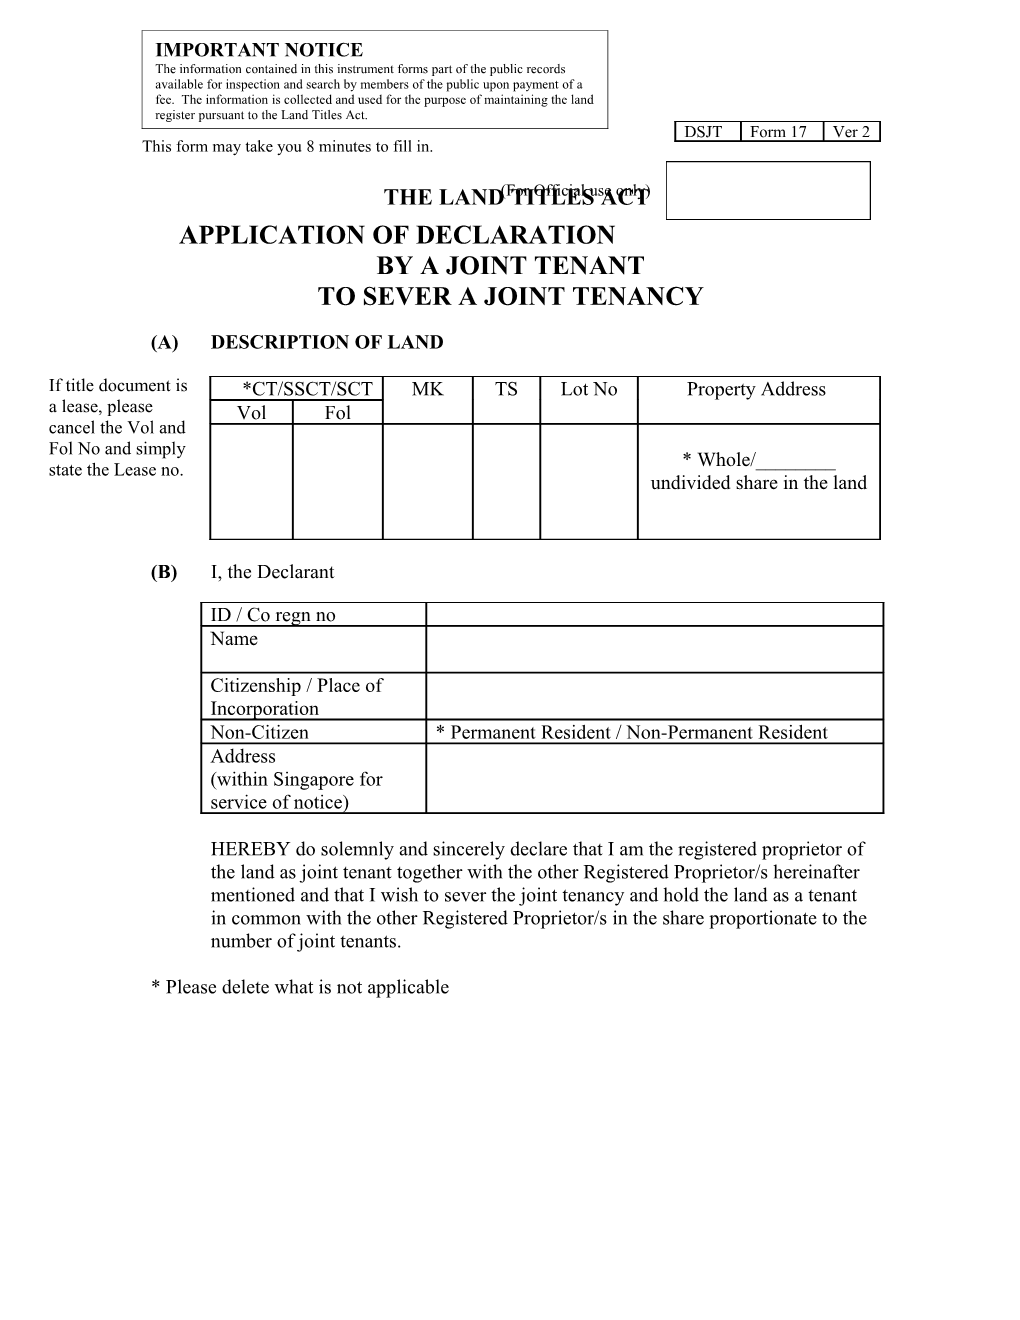 Application of Declaration by a Joint Tenant to Sever a Joint Tenancy